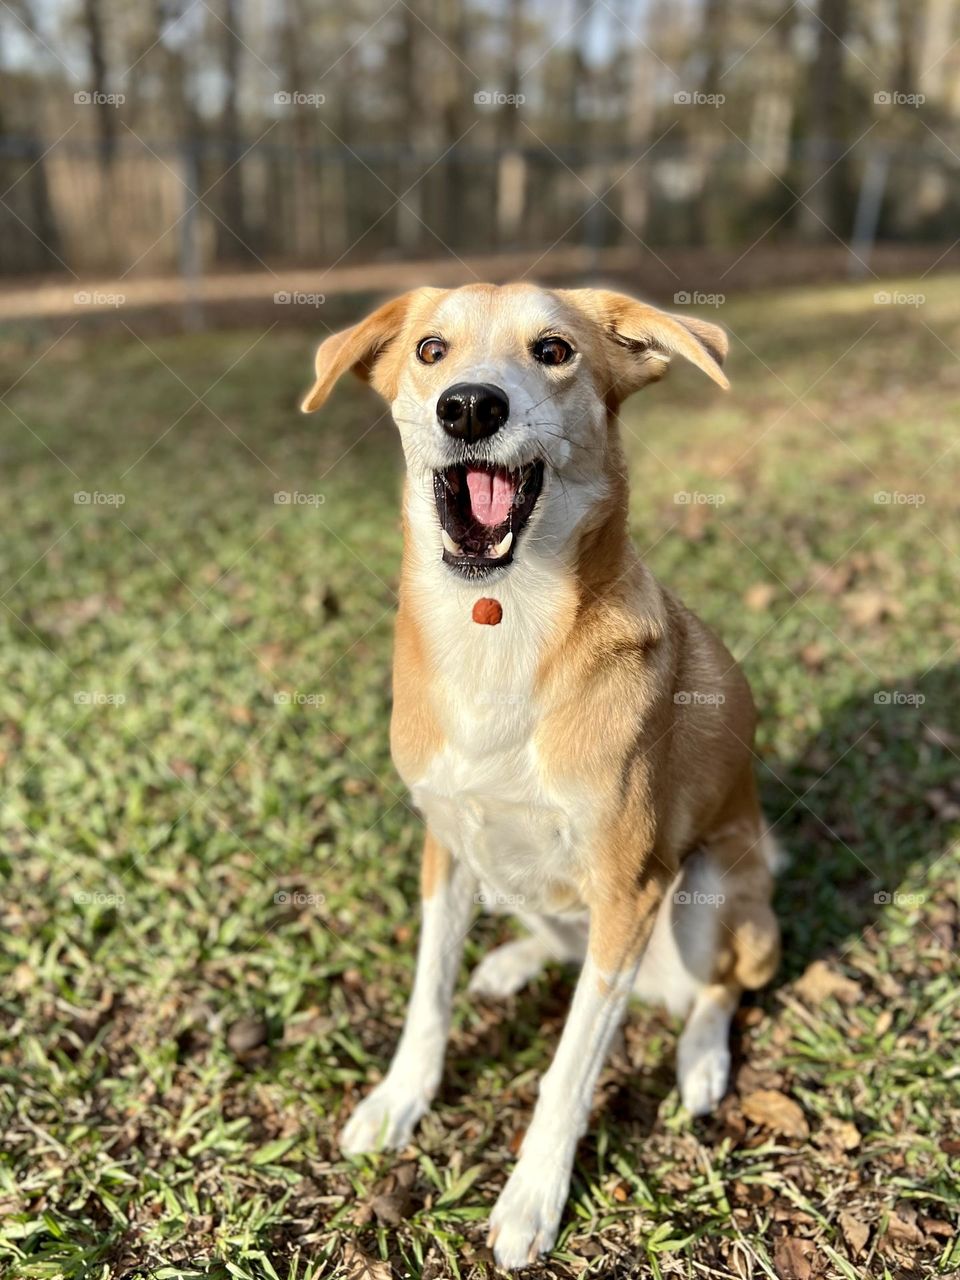 Pet dog with excited expression and open mouth smile preparing to catch a treat. She is sitting in a sunny backyard and the treat is midair.